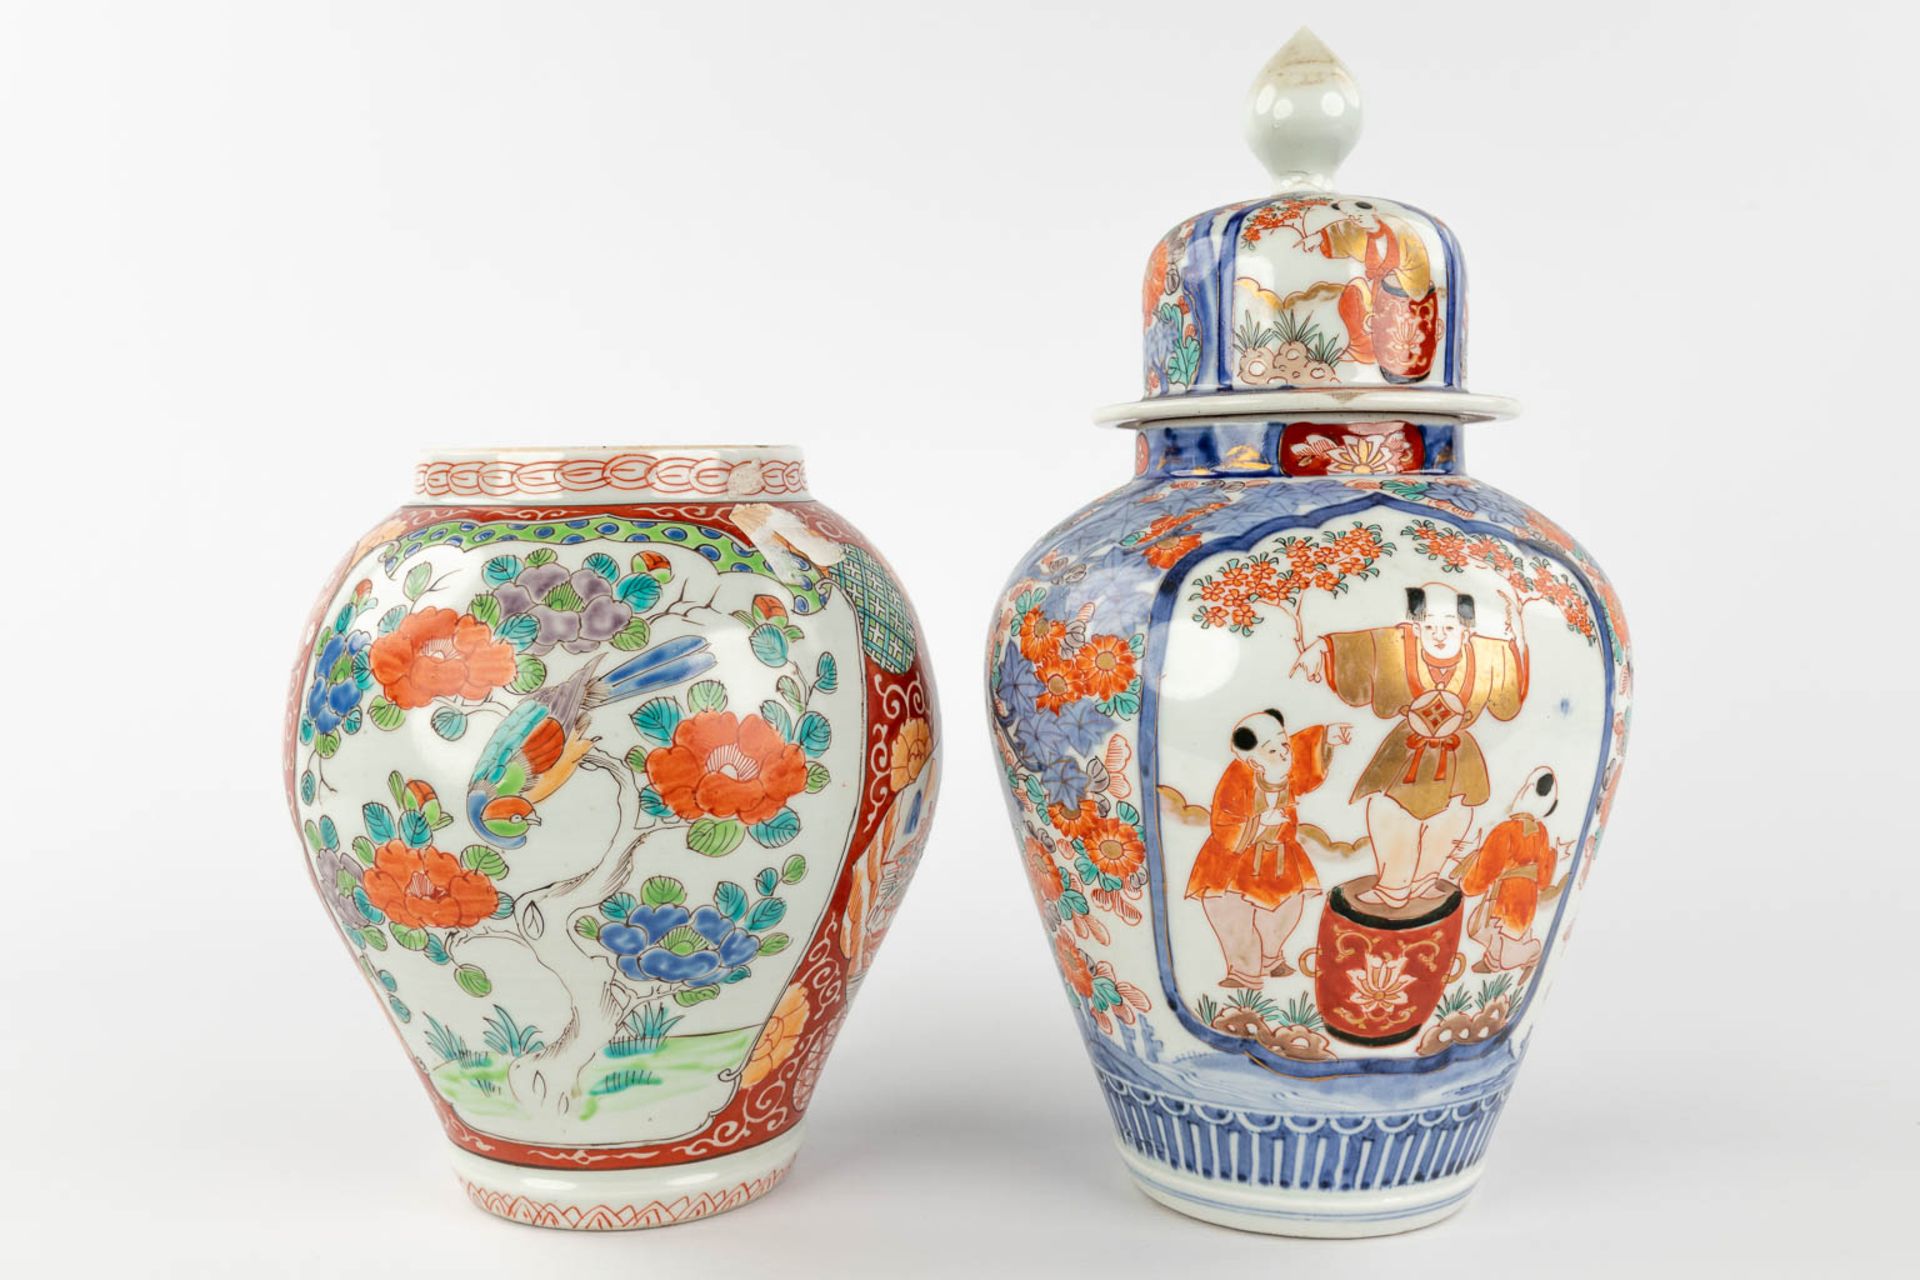 An assembled collection of Japanese Imari and Kutani porcelain. 19th/20th century. (H: 35 x D: 19 cm - Image 12 of 22